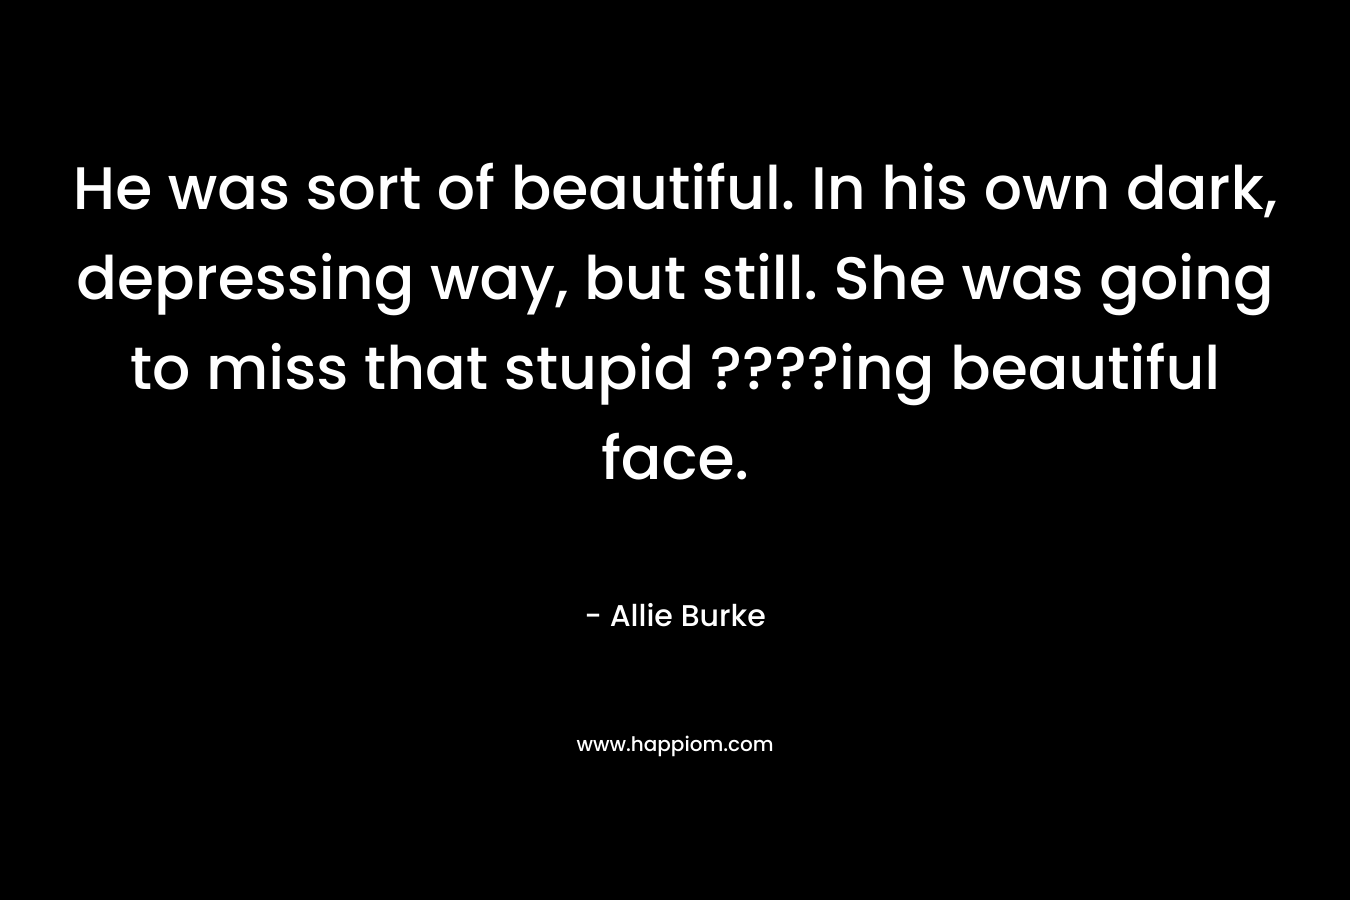 He was sort of beautiful. In his own dark, depressing way, but still. She was going to miss that stupid ????ing beautiful face. – Allie Burke